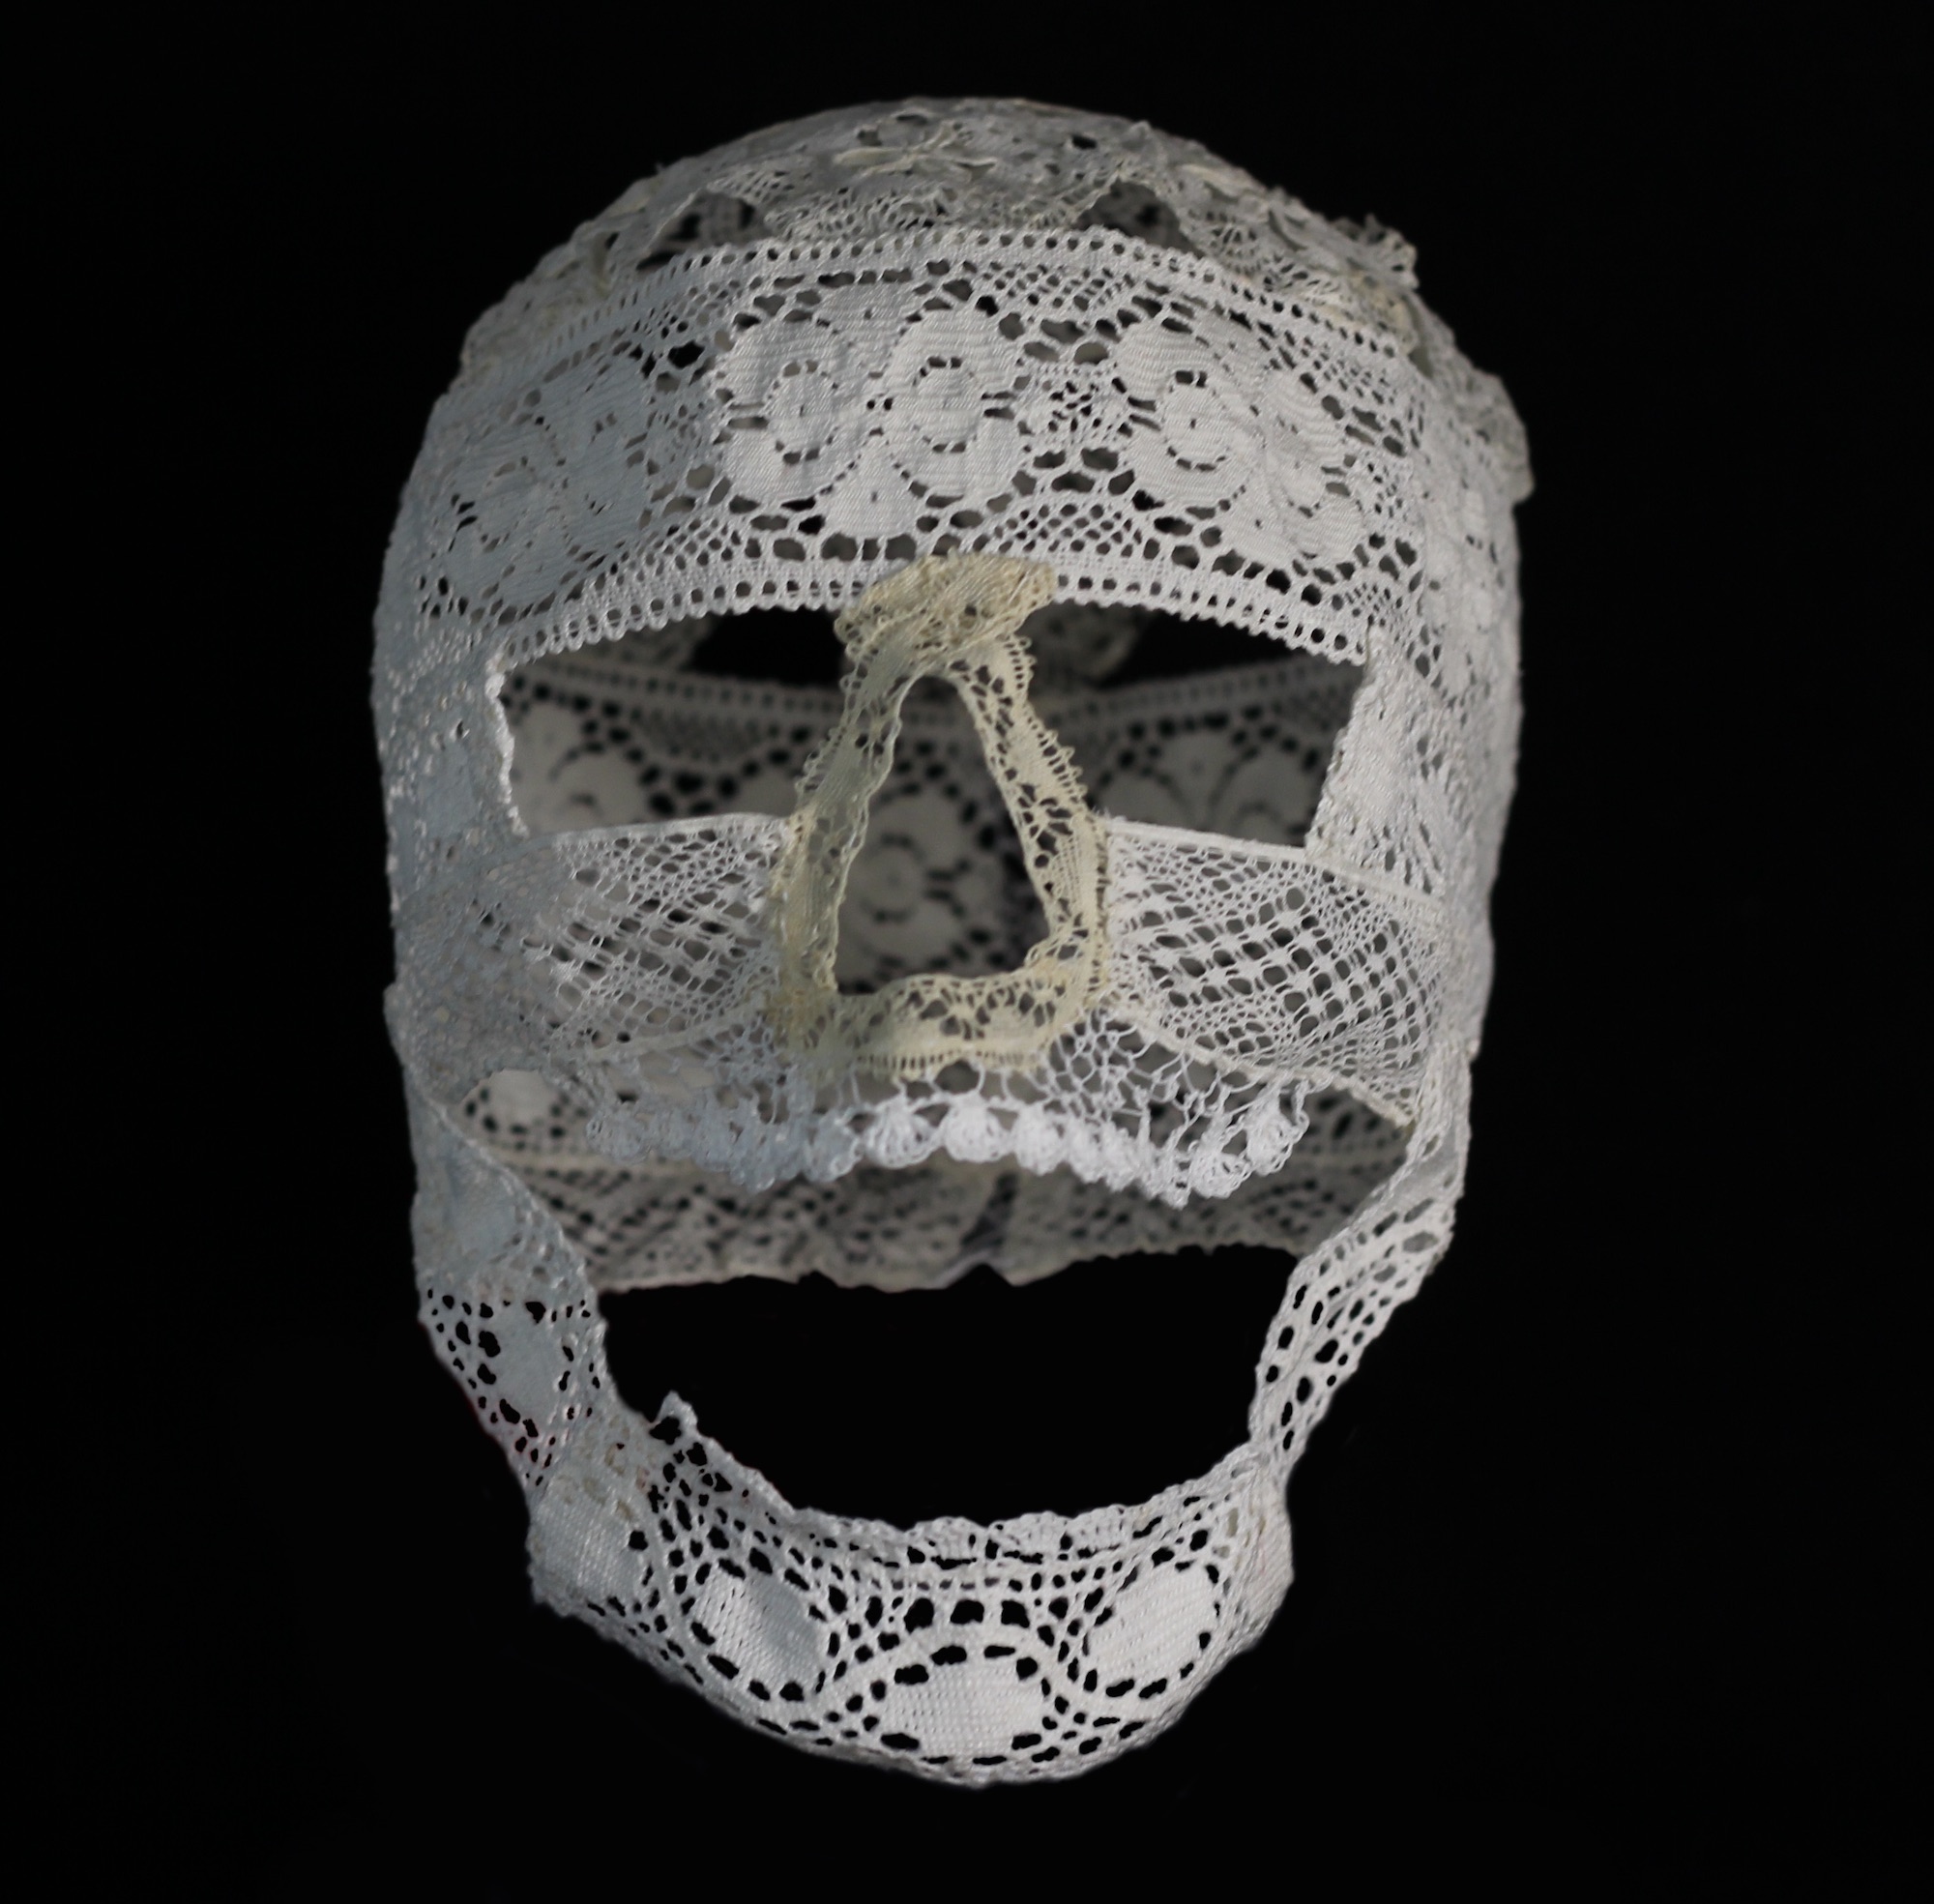 A sculpture of a human skull made entirely from piece of lace sewn together. It is photographed on a black background and shown facing forward.